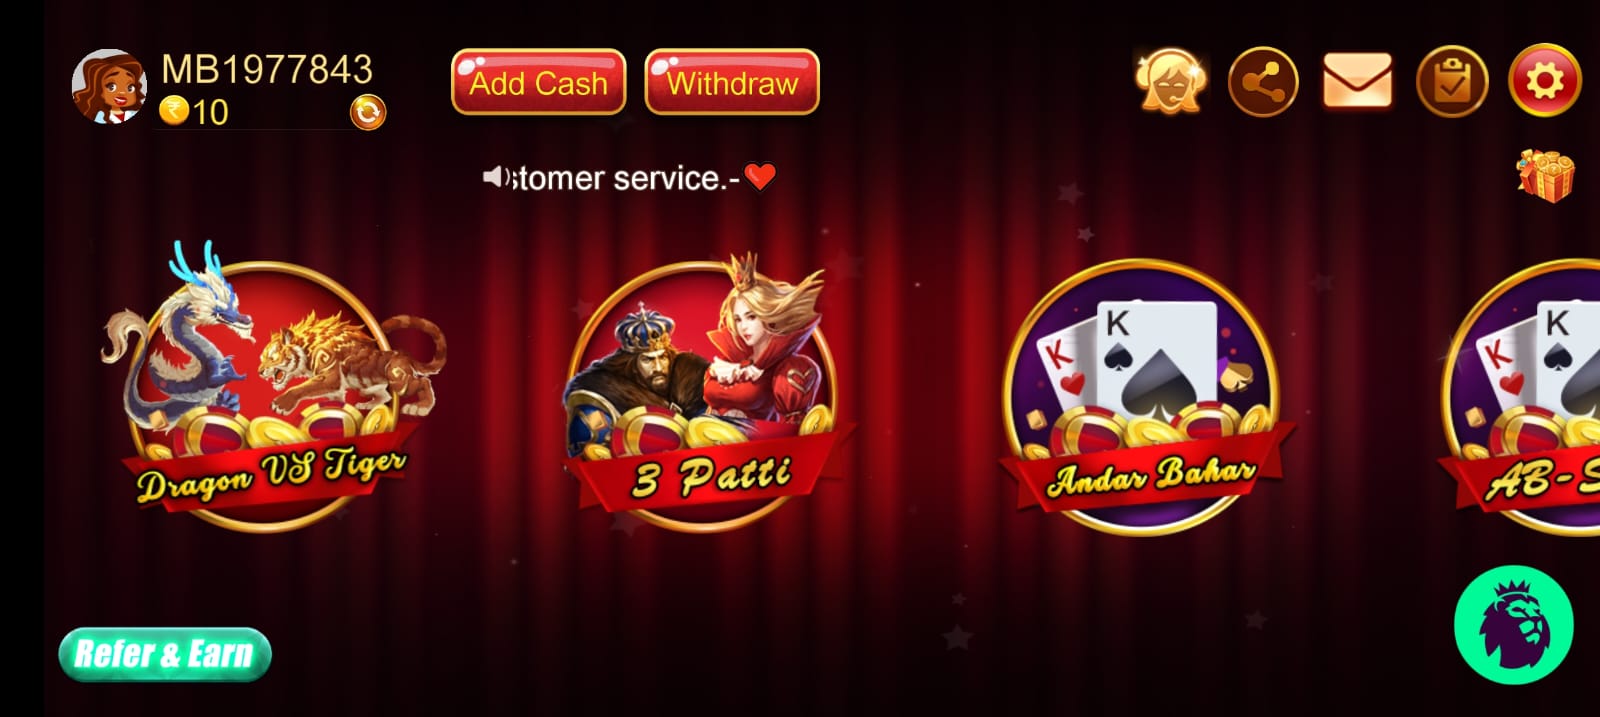 Available Games on Teen Patti Kash Apk